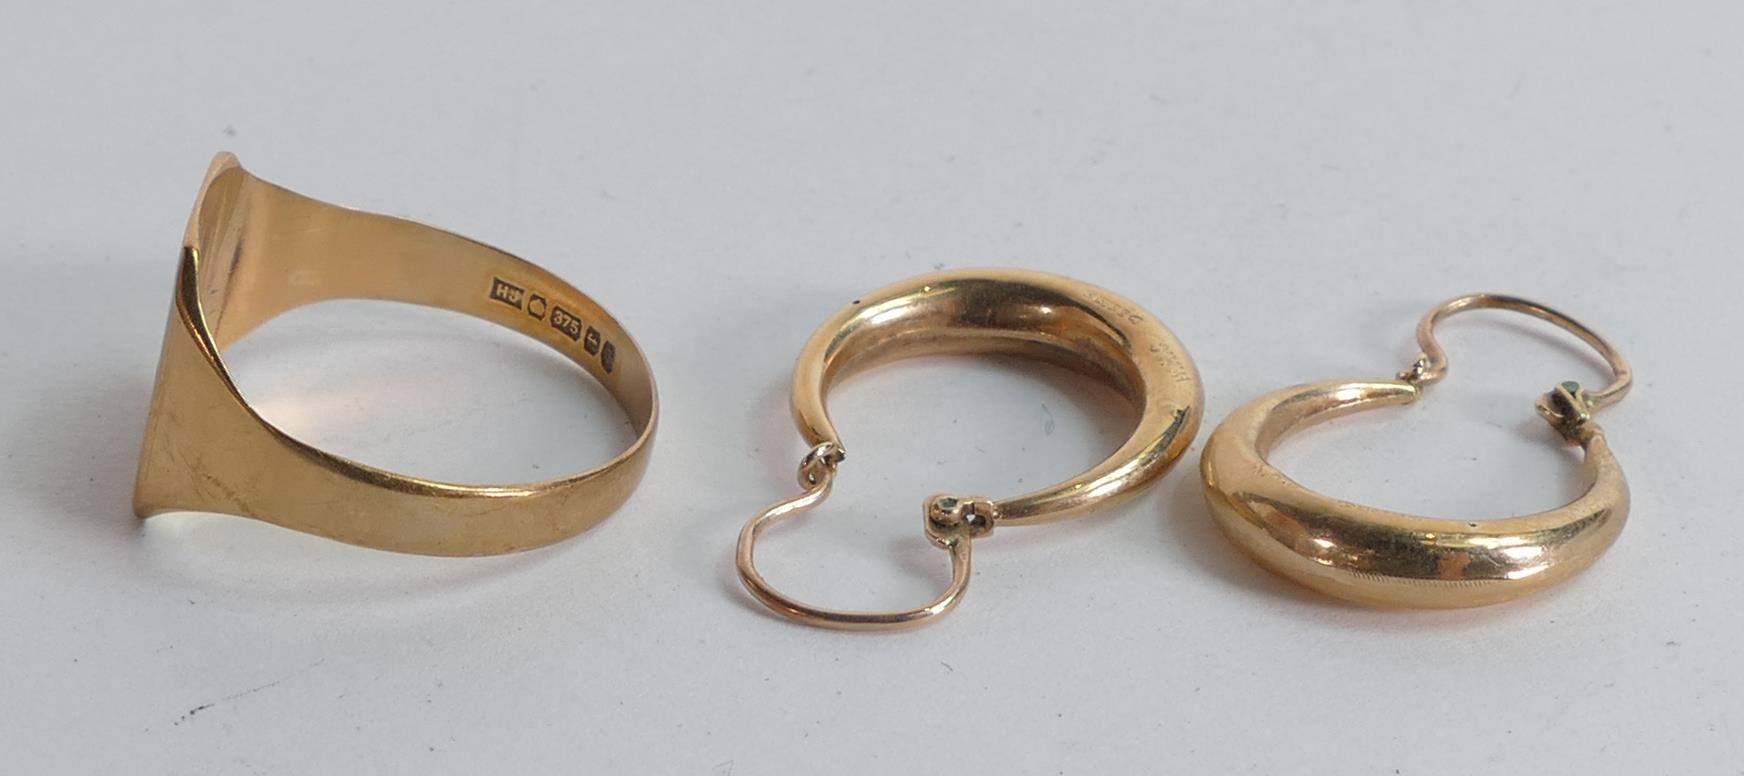 Hallmarked 9ct gold signet ring & pair 9ct earrings, gross weight 3.6g - Image 3 of 3